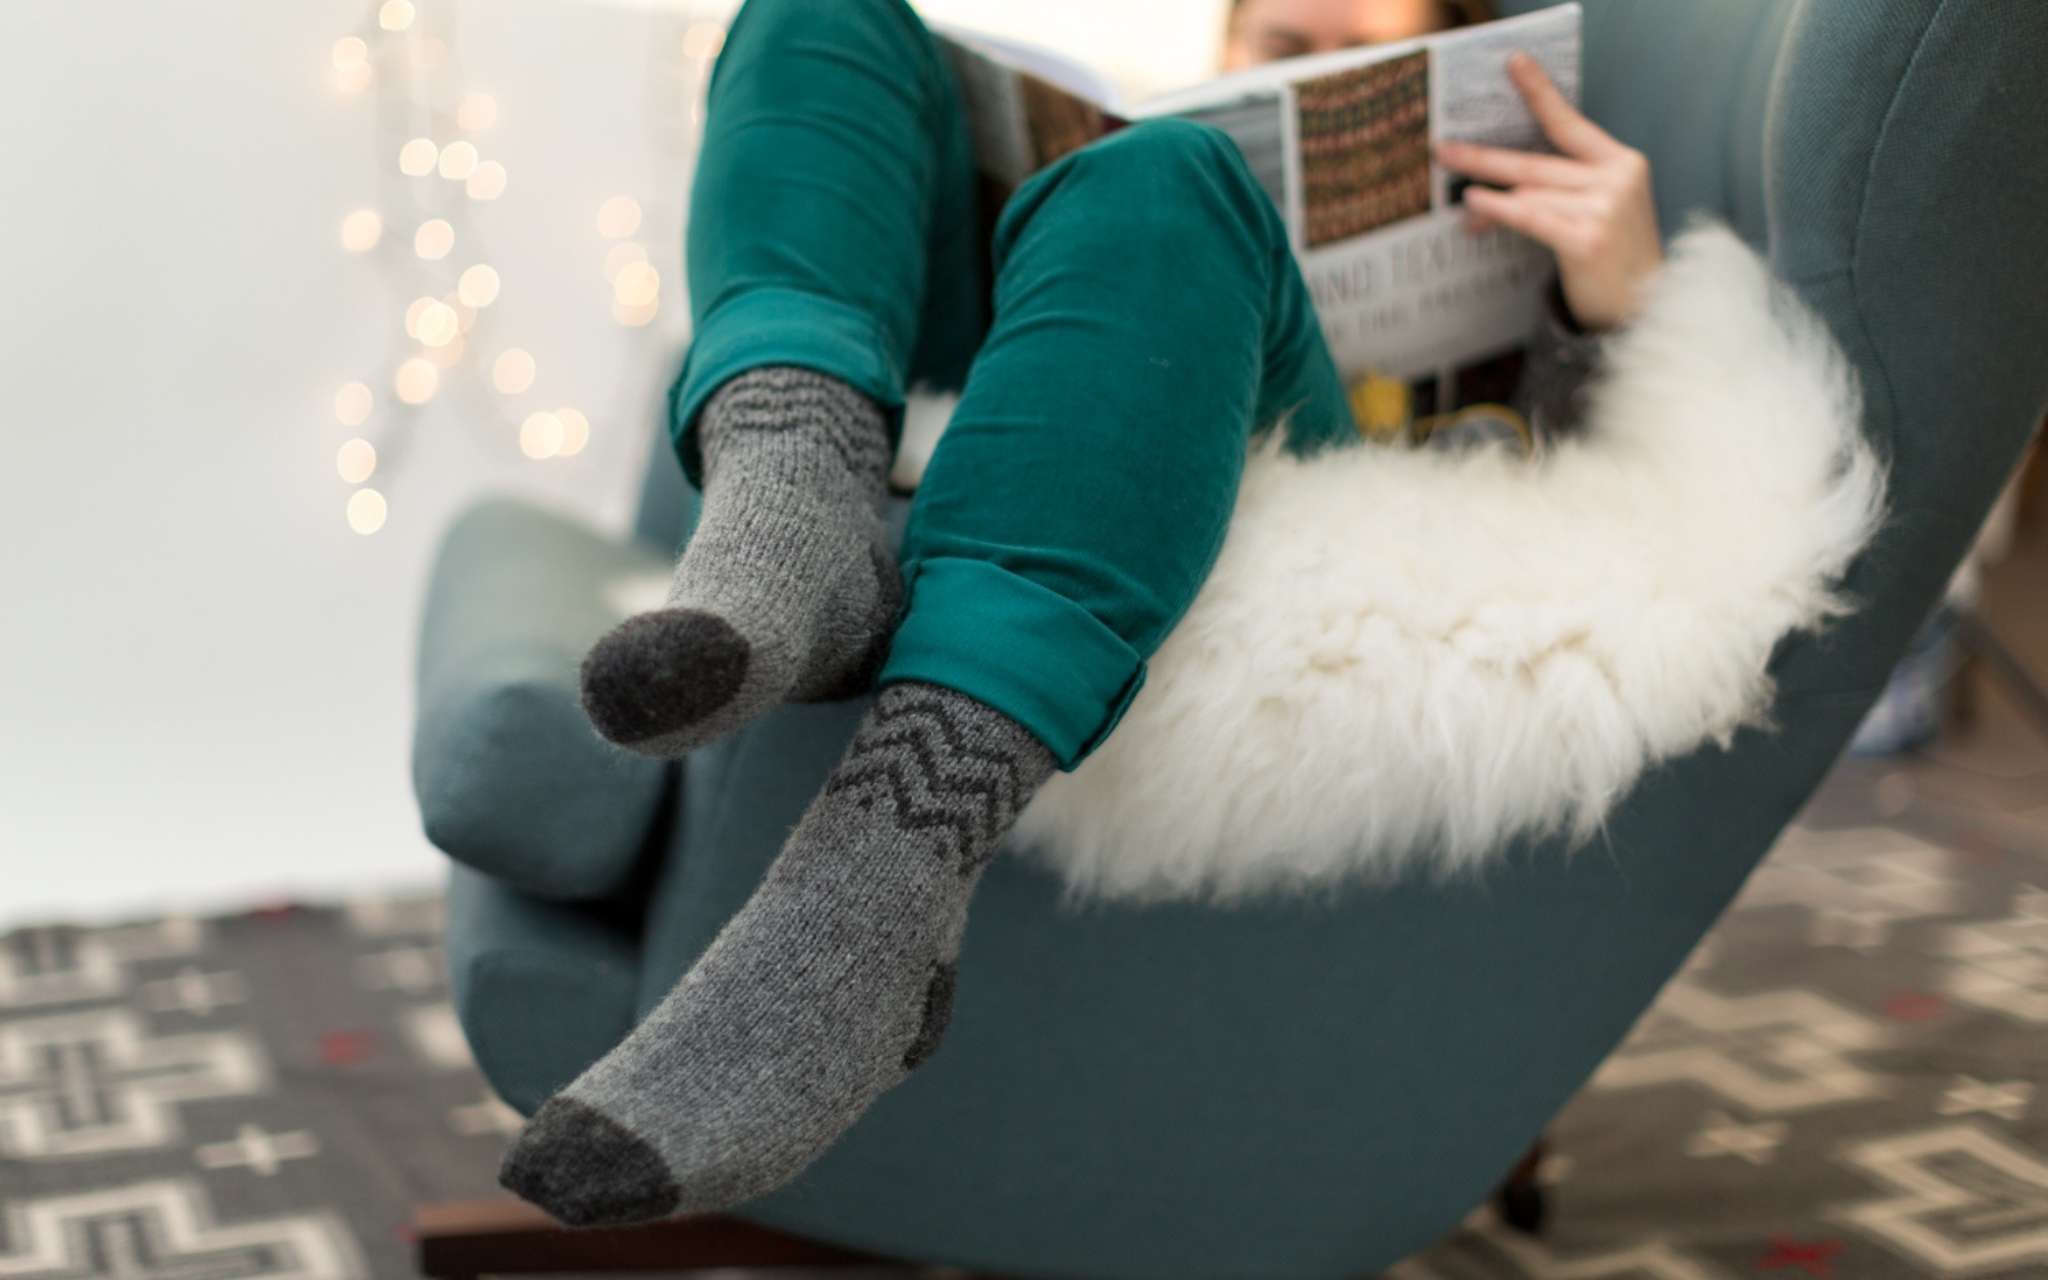 A model wears grey colourwork socks and teal trousers, while snuggled on an armchair holding a book. There are twinkling lights in the background and they sit on a fluffy white blanket.